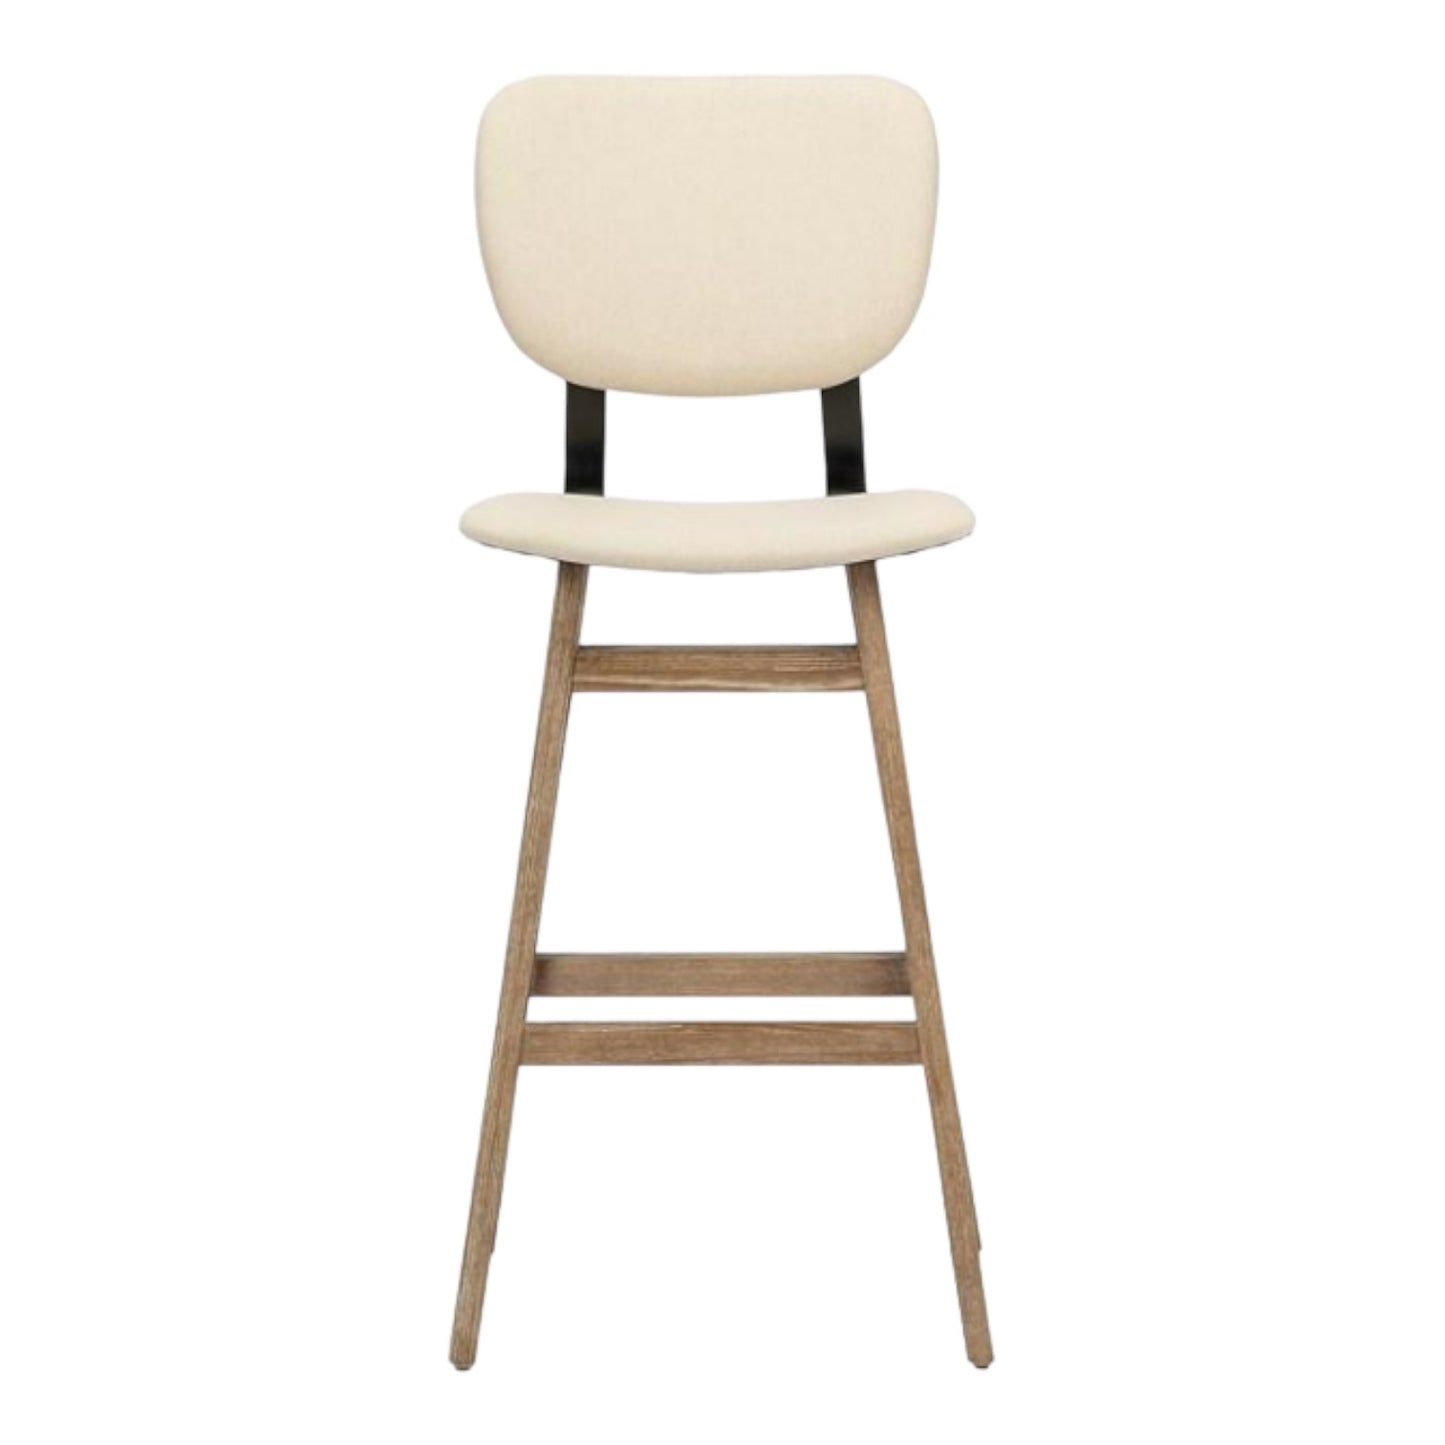 Picture of Hollister Stool Cream Tall